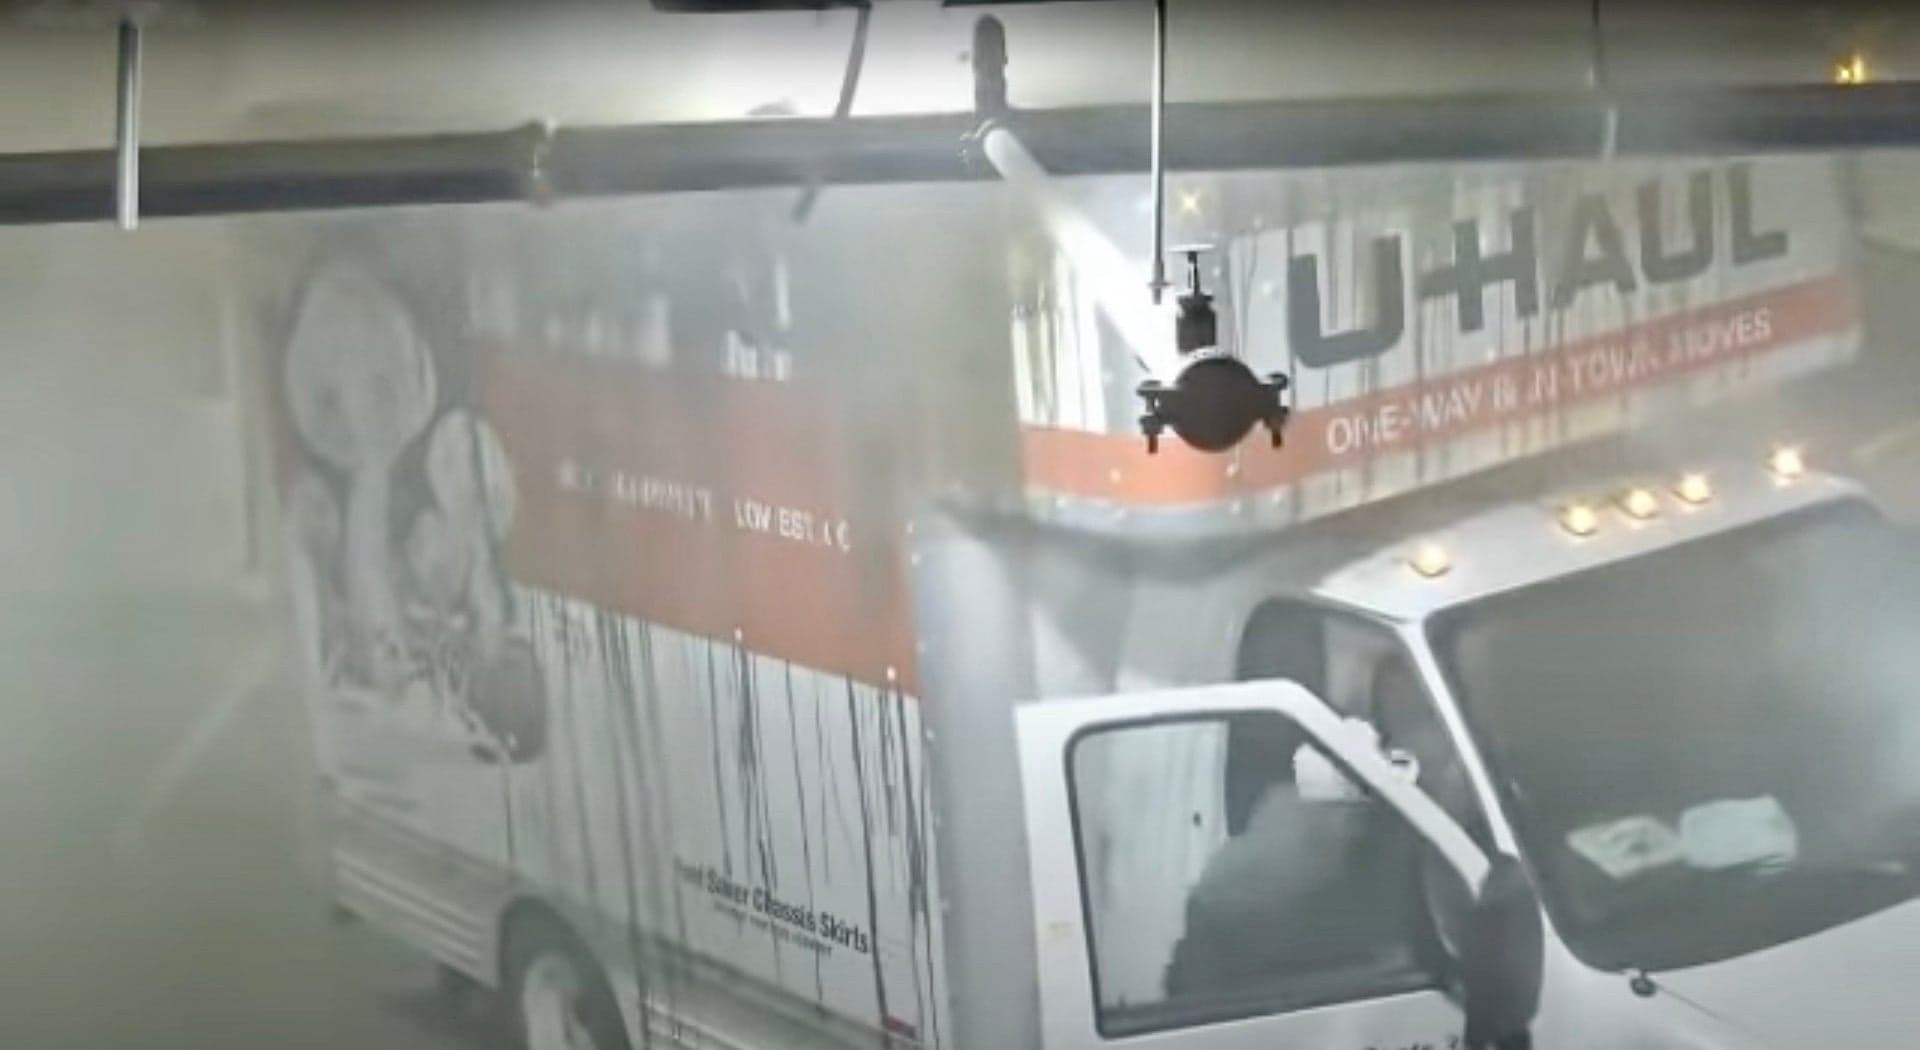 Watch This U-Haul Truck Parking Attempt End in Complete and Total Disaster